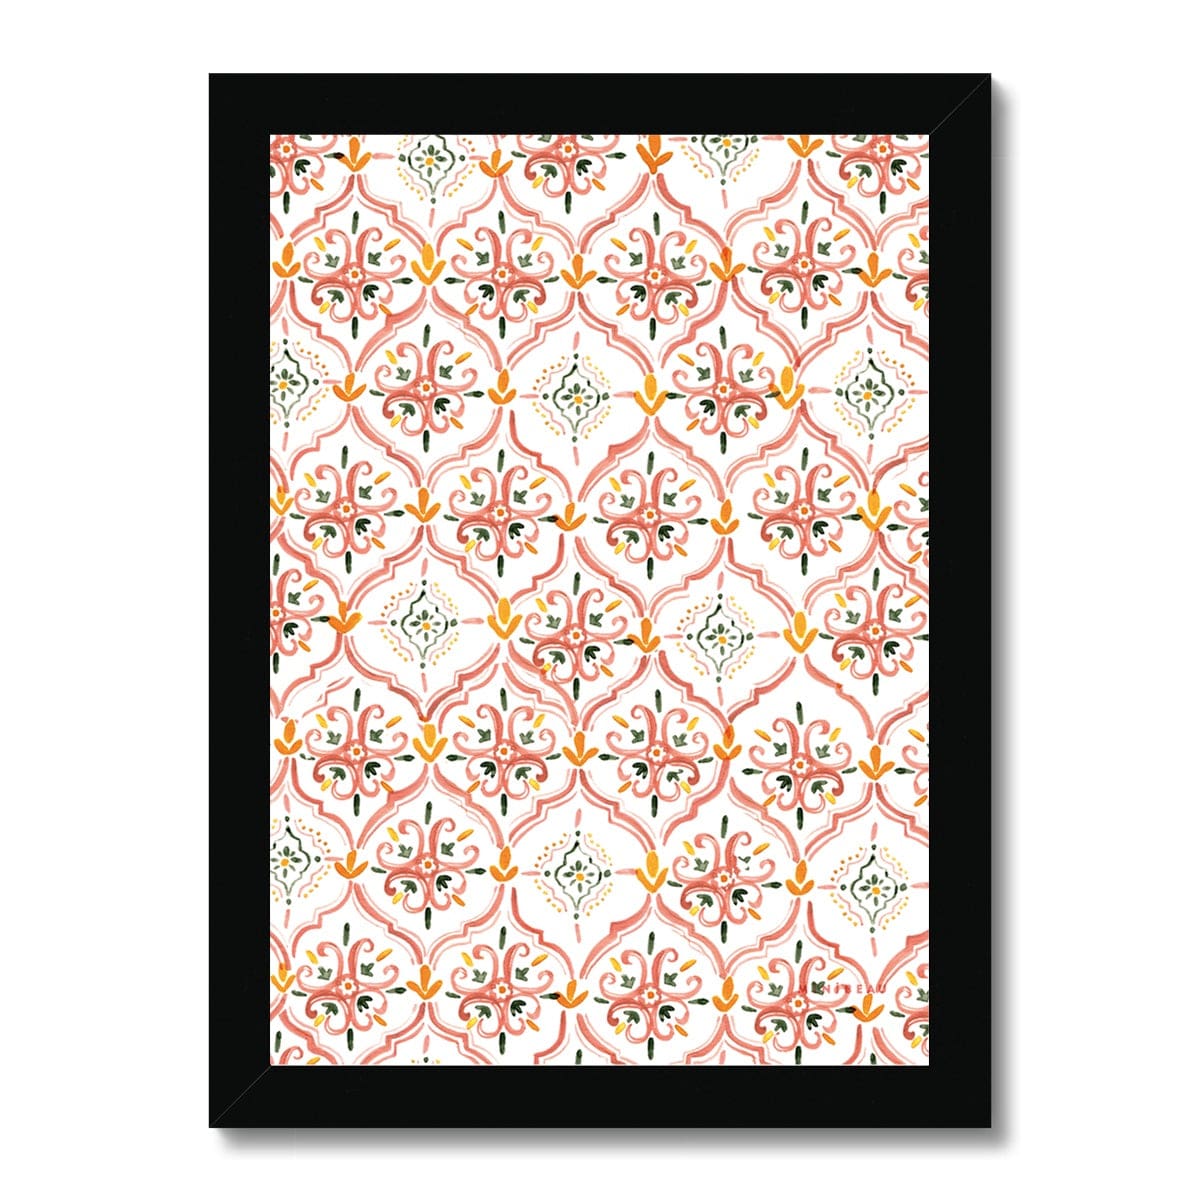 Art print in black frame. Our Kristina Art print is a repeating Kristina 'tile' pattern in coral pink, orange, and green floral print